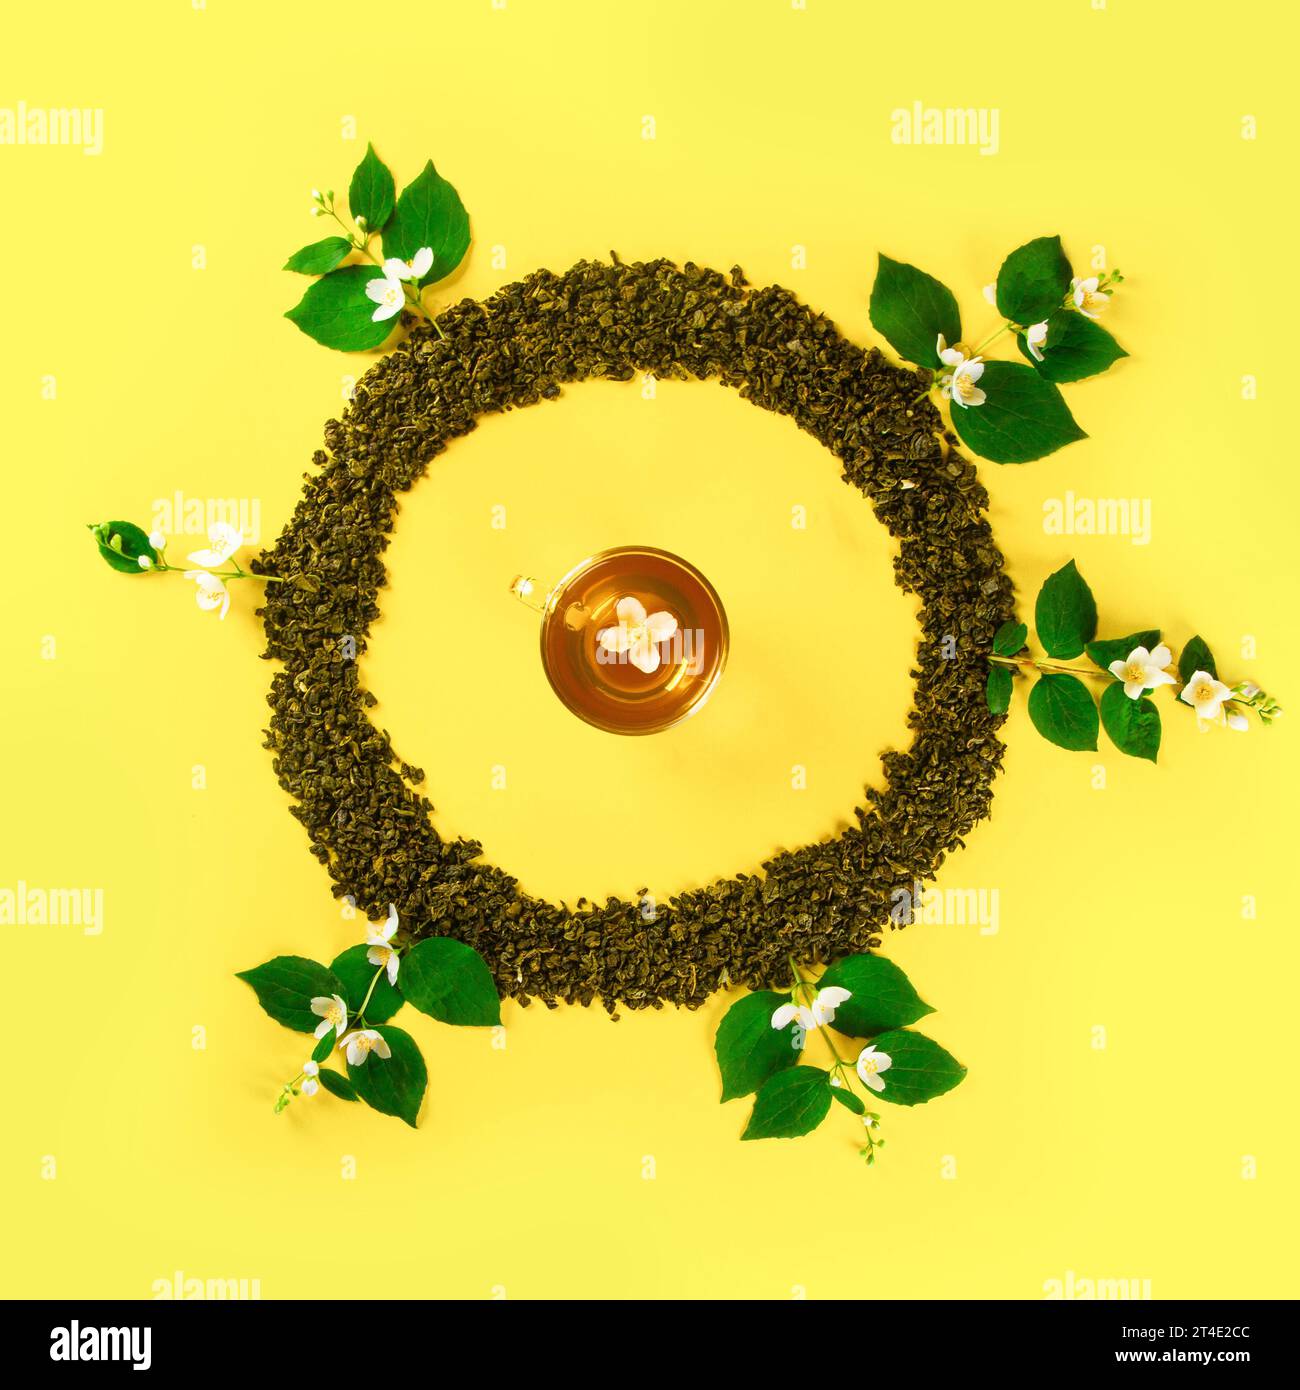 Mockup of dried tea leaves and fresh jasmine flowers shaped in round Frame with tea cup in center isolated on plain yellow background Stock Photo